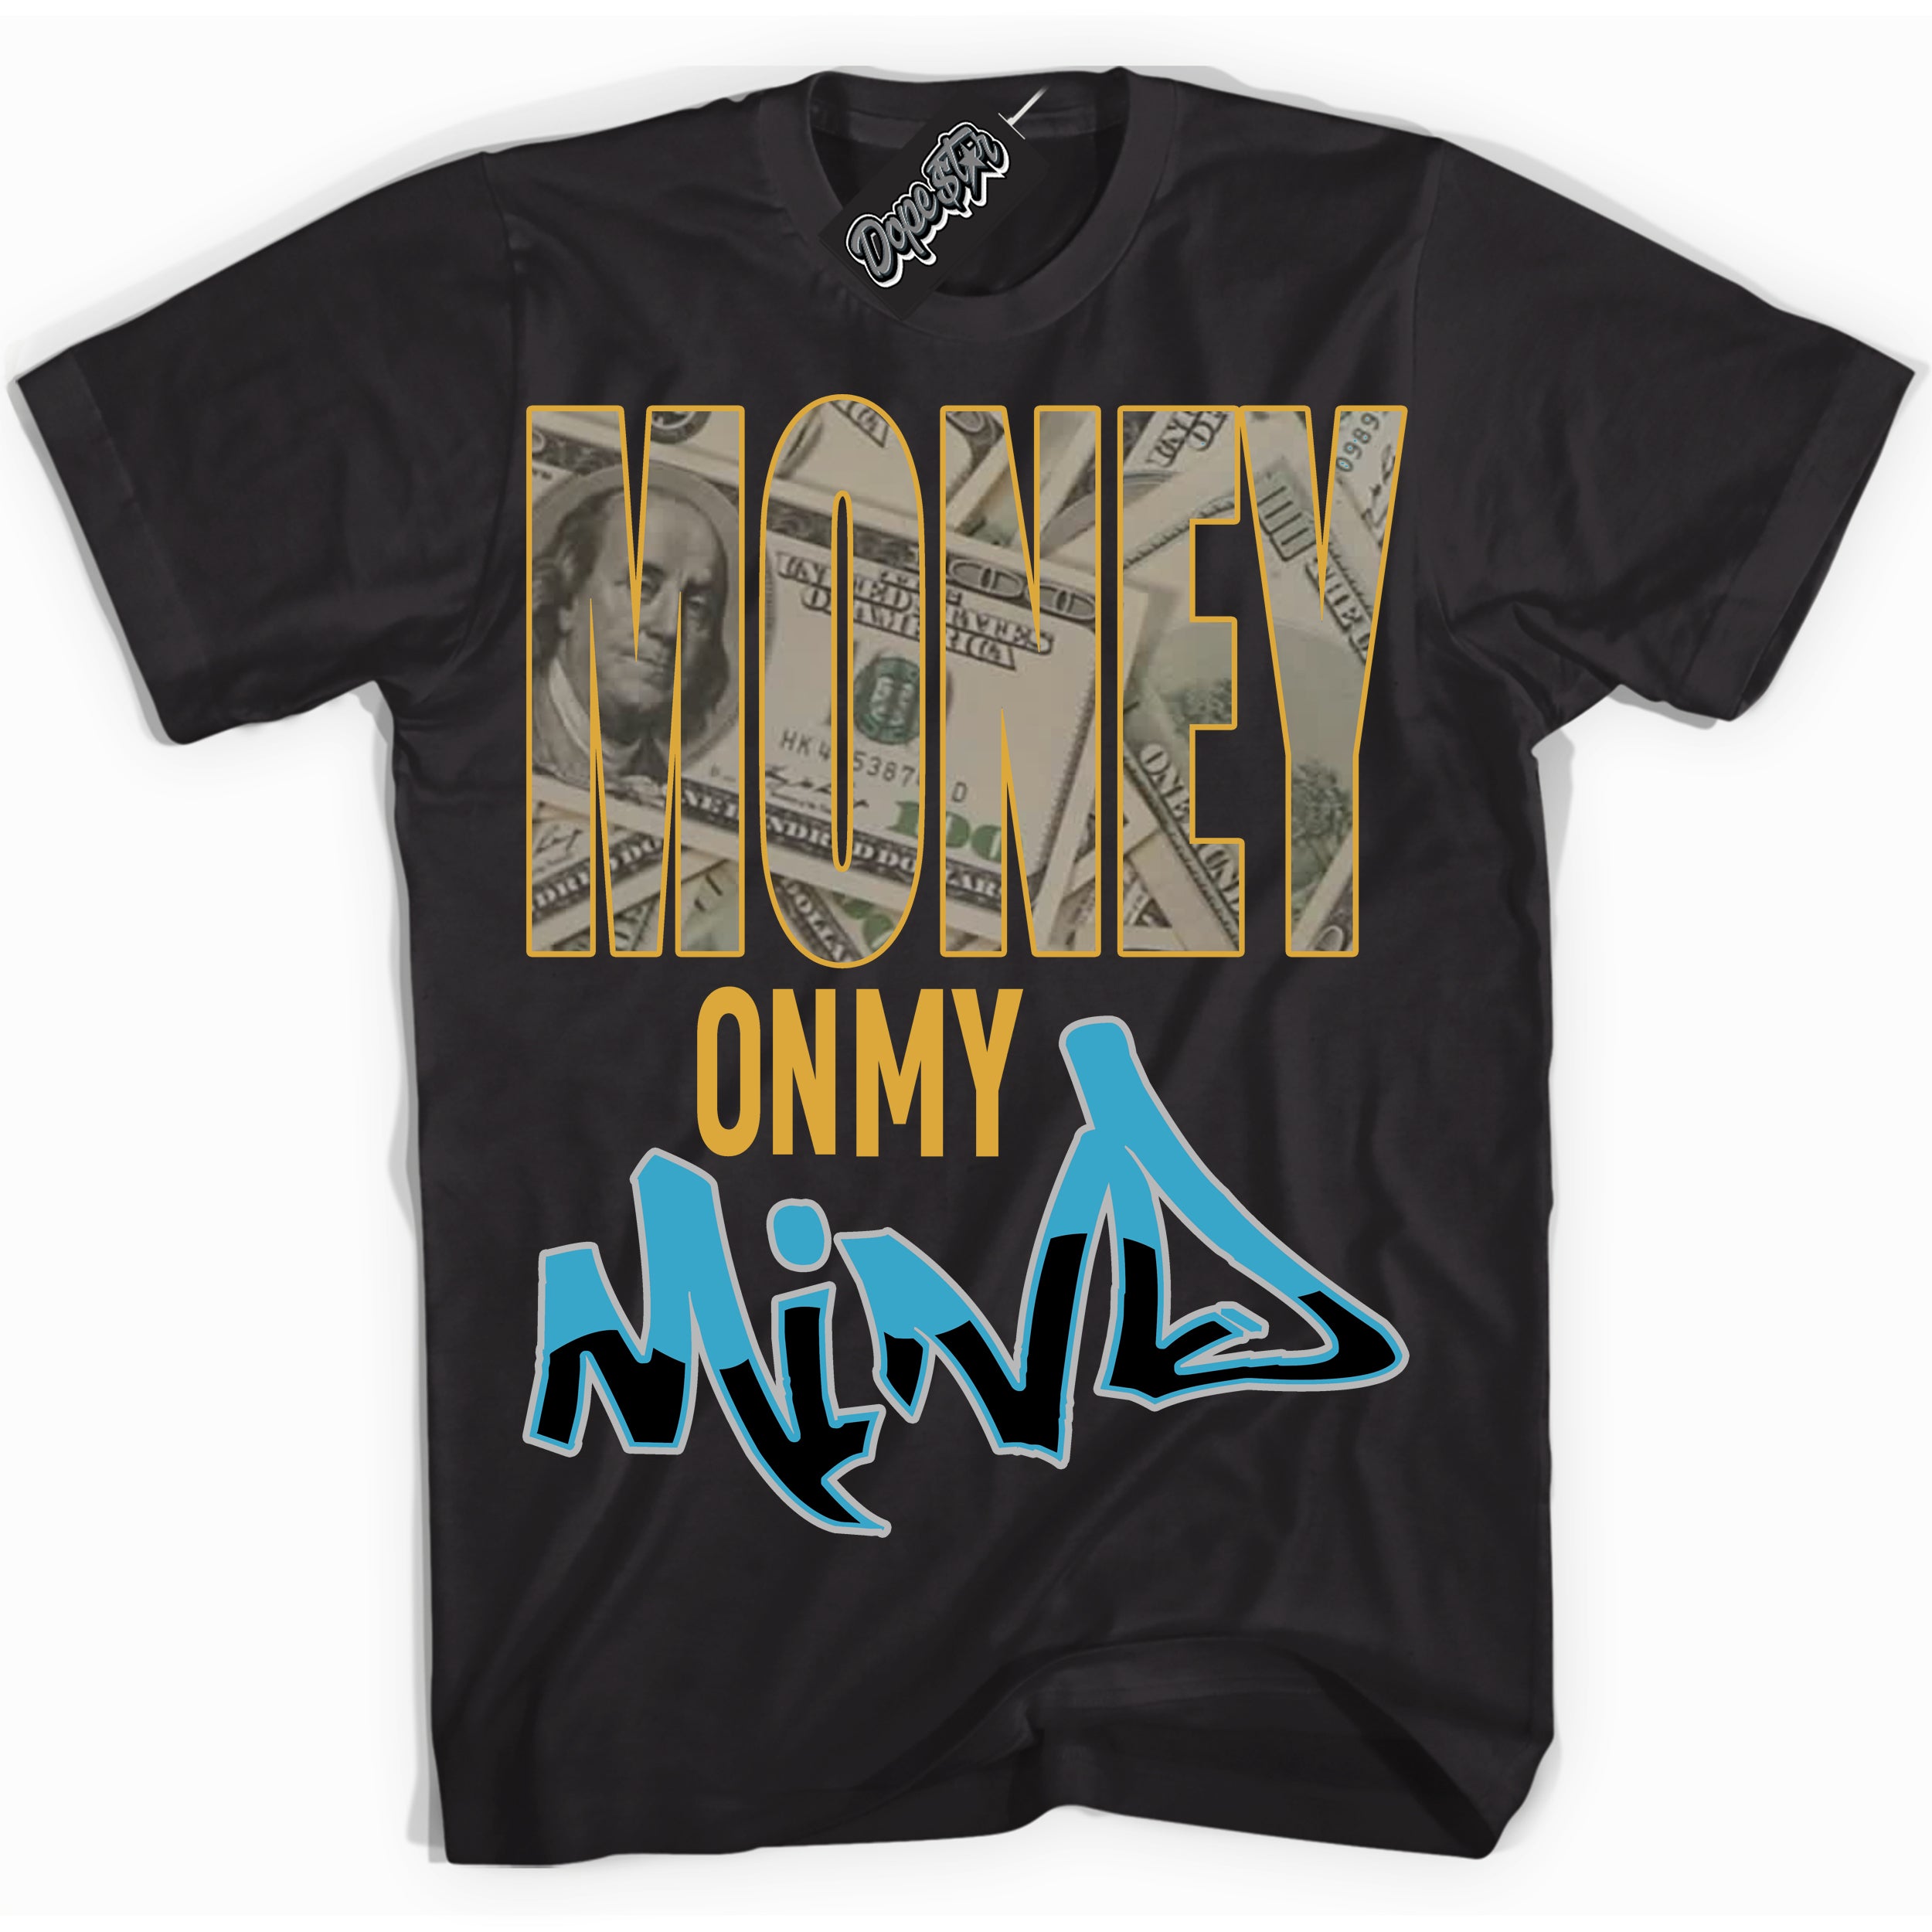 Cool Black Shirt with “ Money On My Mind” design that perfectly matches Aqua 5s Sneakers.